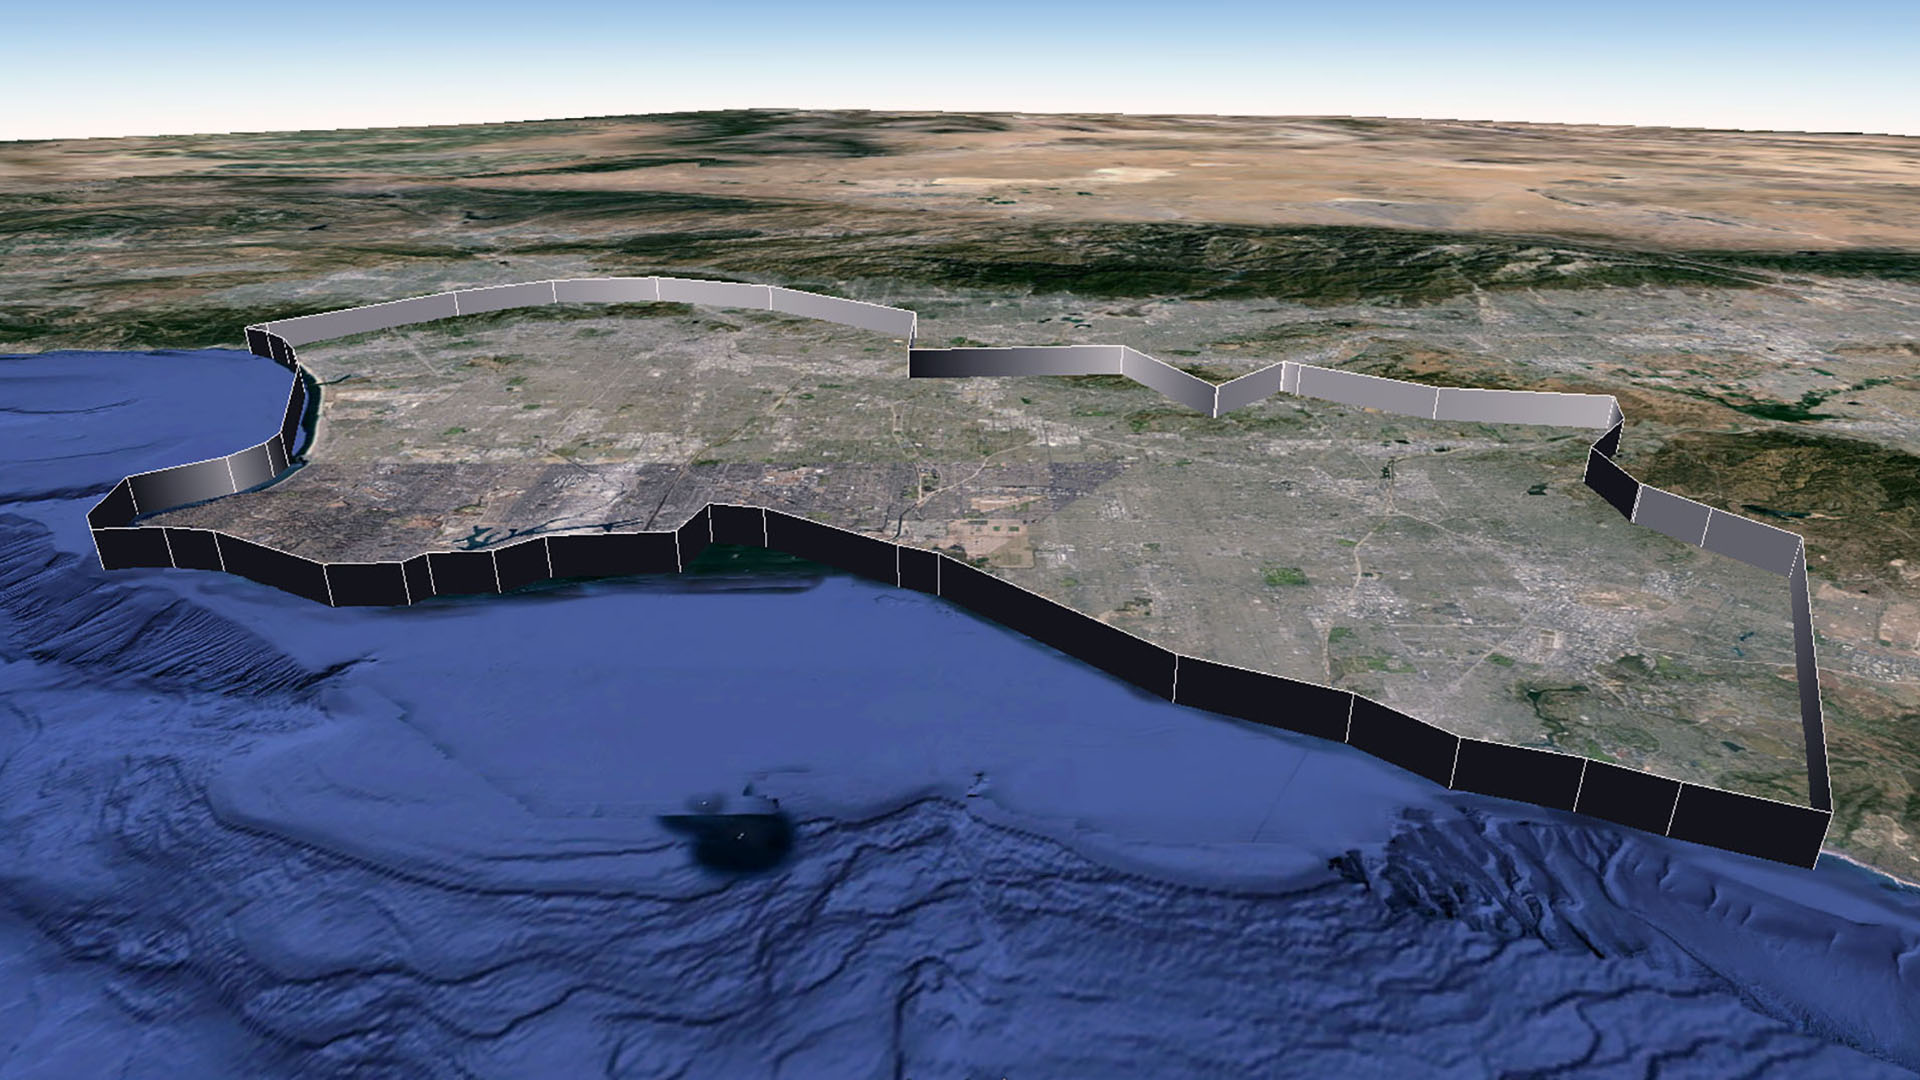 The Frontier of Resolution, here visualized as a wall about 1,500 meters in height, straddles the border between Los Angeles and Orange Counties in Southern California. Judging from Google’s initial promotional material release, Los Angeles was among the first four cities to be digitally modeled using the stereophotogrammetry process. As such, the frontier is brazen in its divisions, and can be described with a spartan 49 placemarks (compare to the later completed model of Chicago, which requires 419 placemarks to trace its edge).